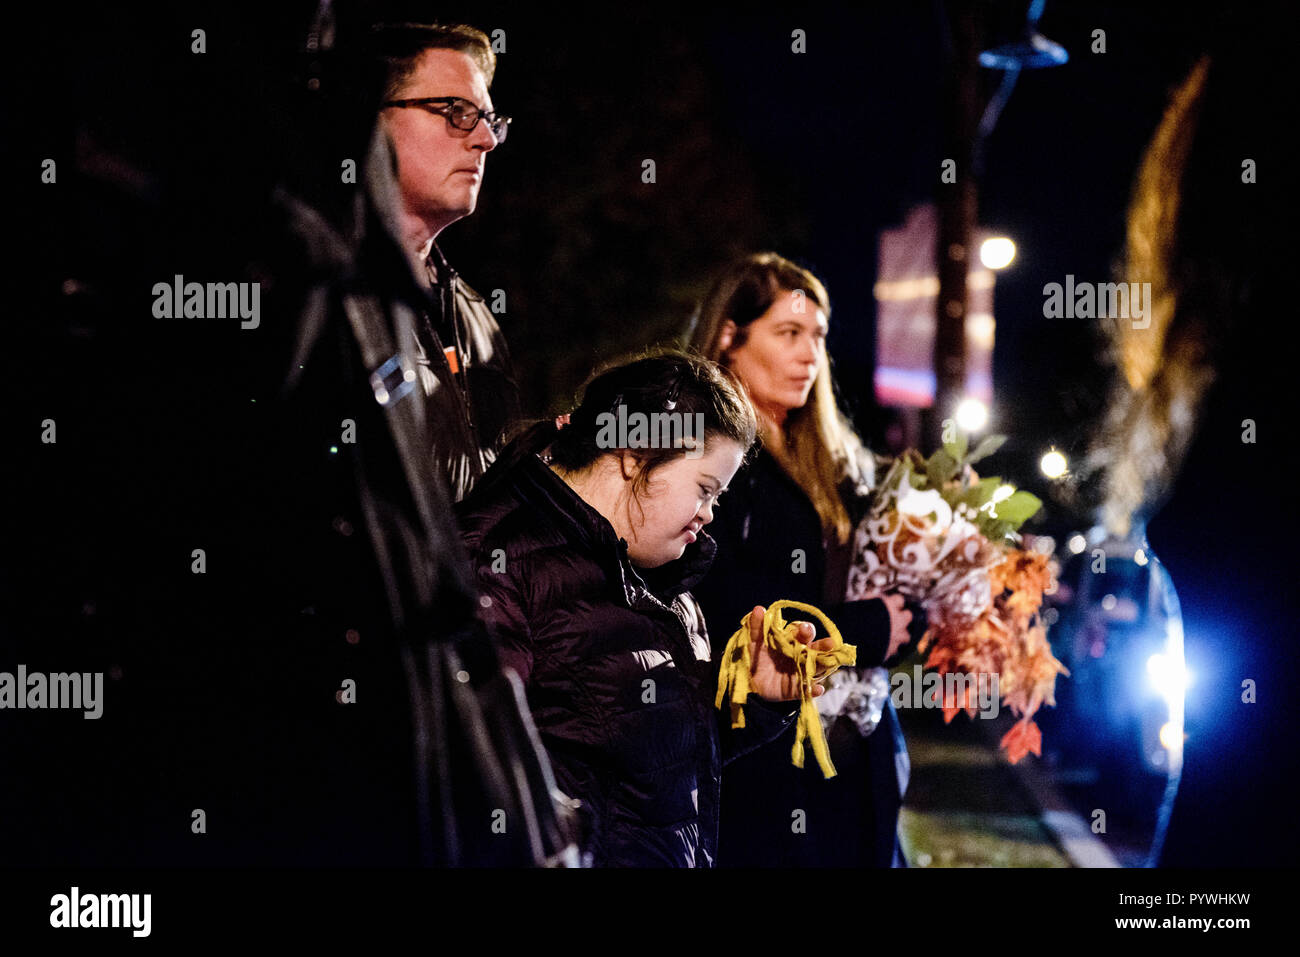 Pittsburgh, USA. 29th Oct, 2018. Differently-abled girl in prayer with caretaker and woman with flowers.After the shooting at the Tree of Life synagogue in Squirrel Hill, Pittsburgh, PA, mourning takes place, with police around, the larger community comes together with music and healing. Credit: Aaron Jackendoff/SOPA Images/ZUMA Wire/Alamy Live News Stock Photo